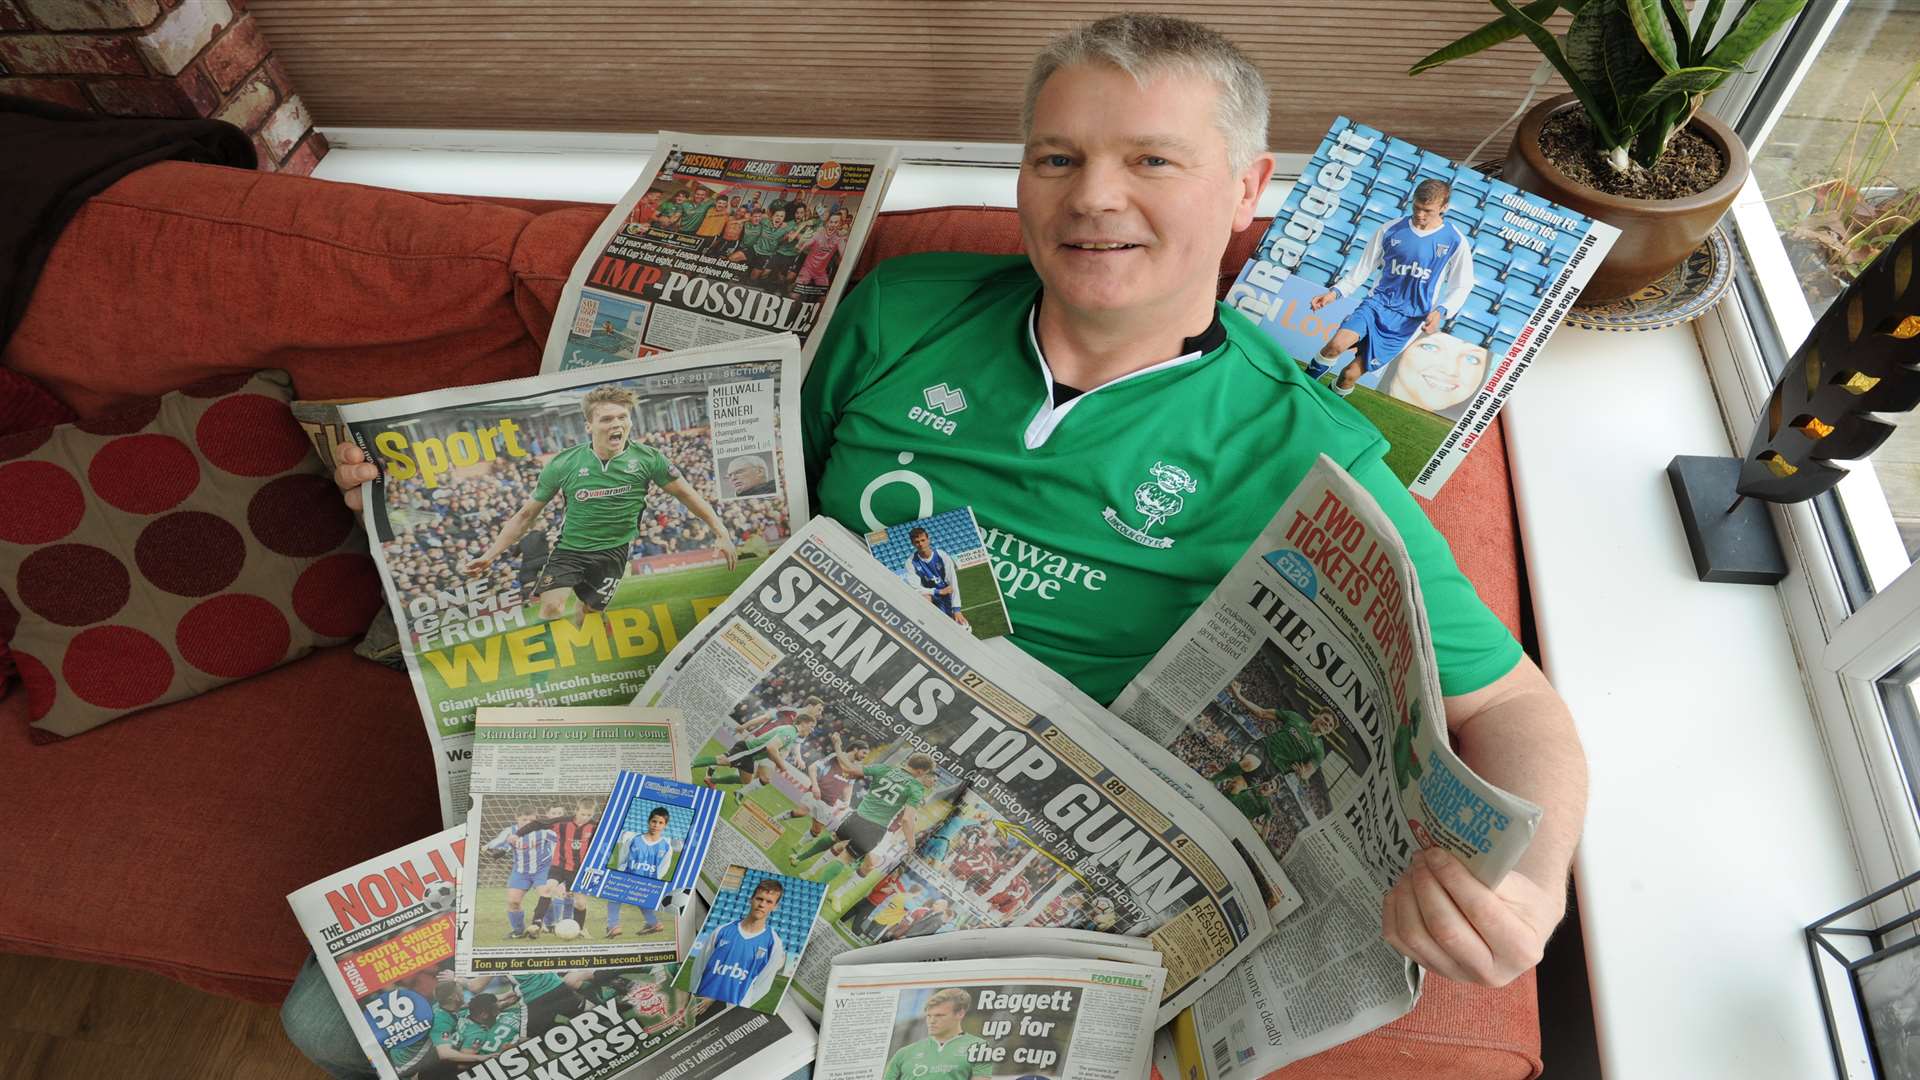 Proud dad John Raggett with Sundays' papers